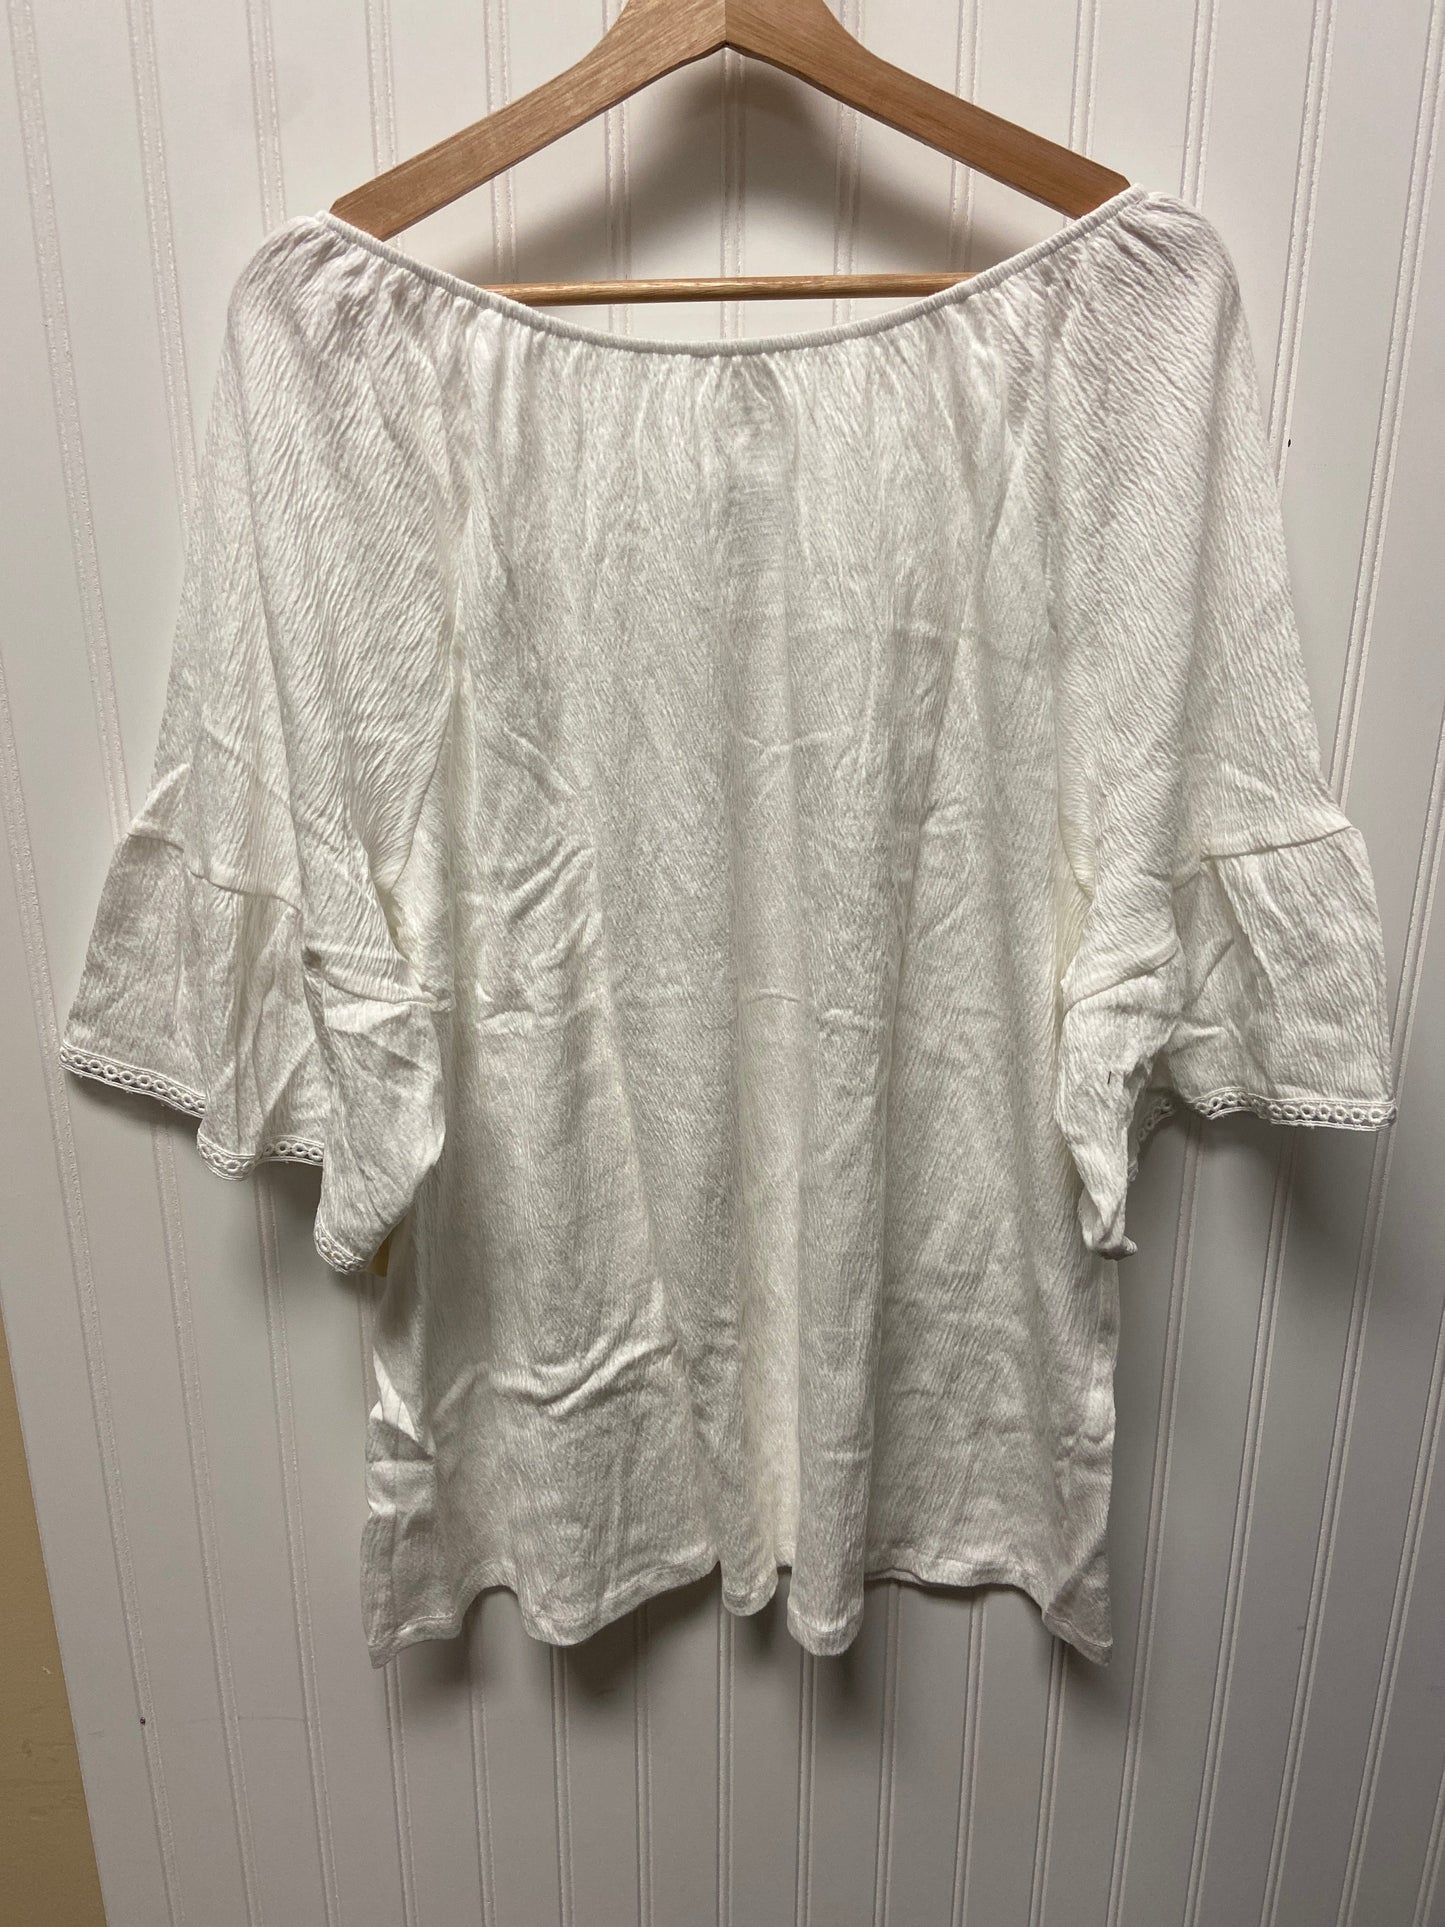 White Top 3/4 Sleeve St Johns Bay, Size 2x